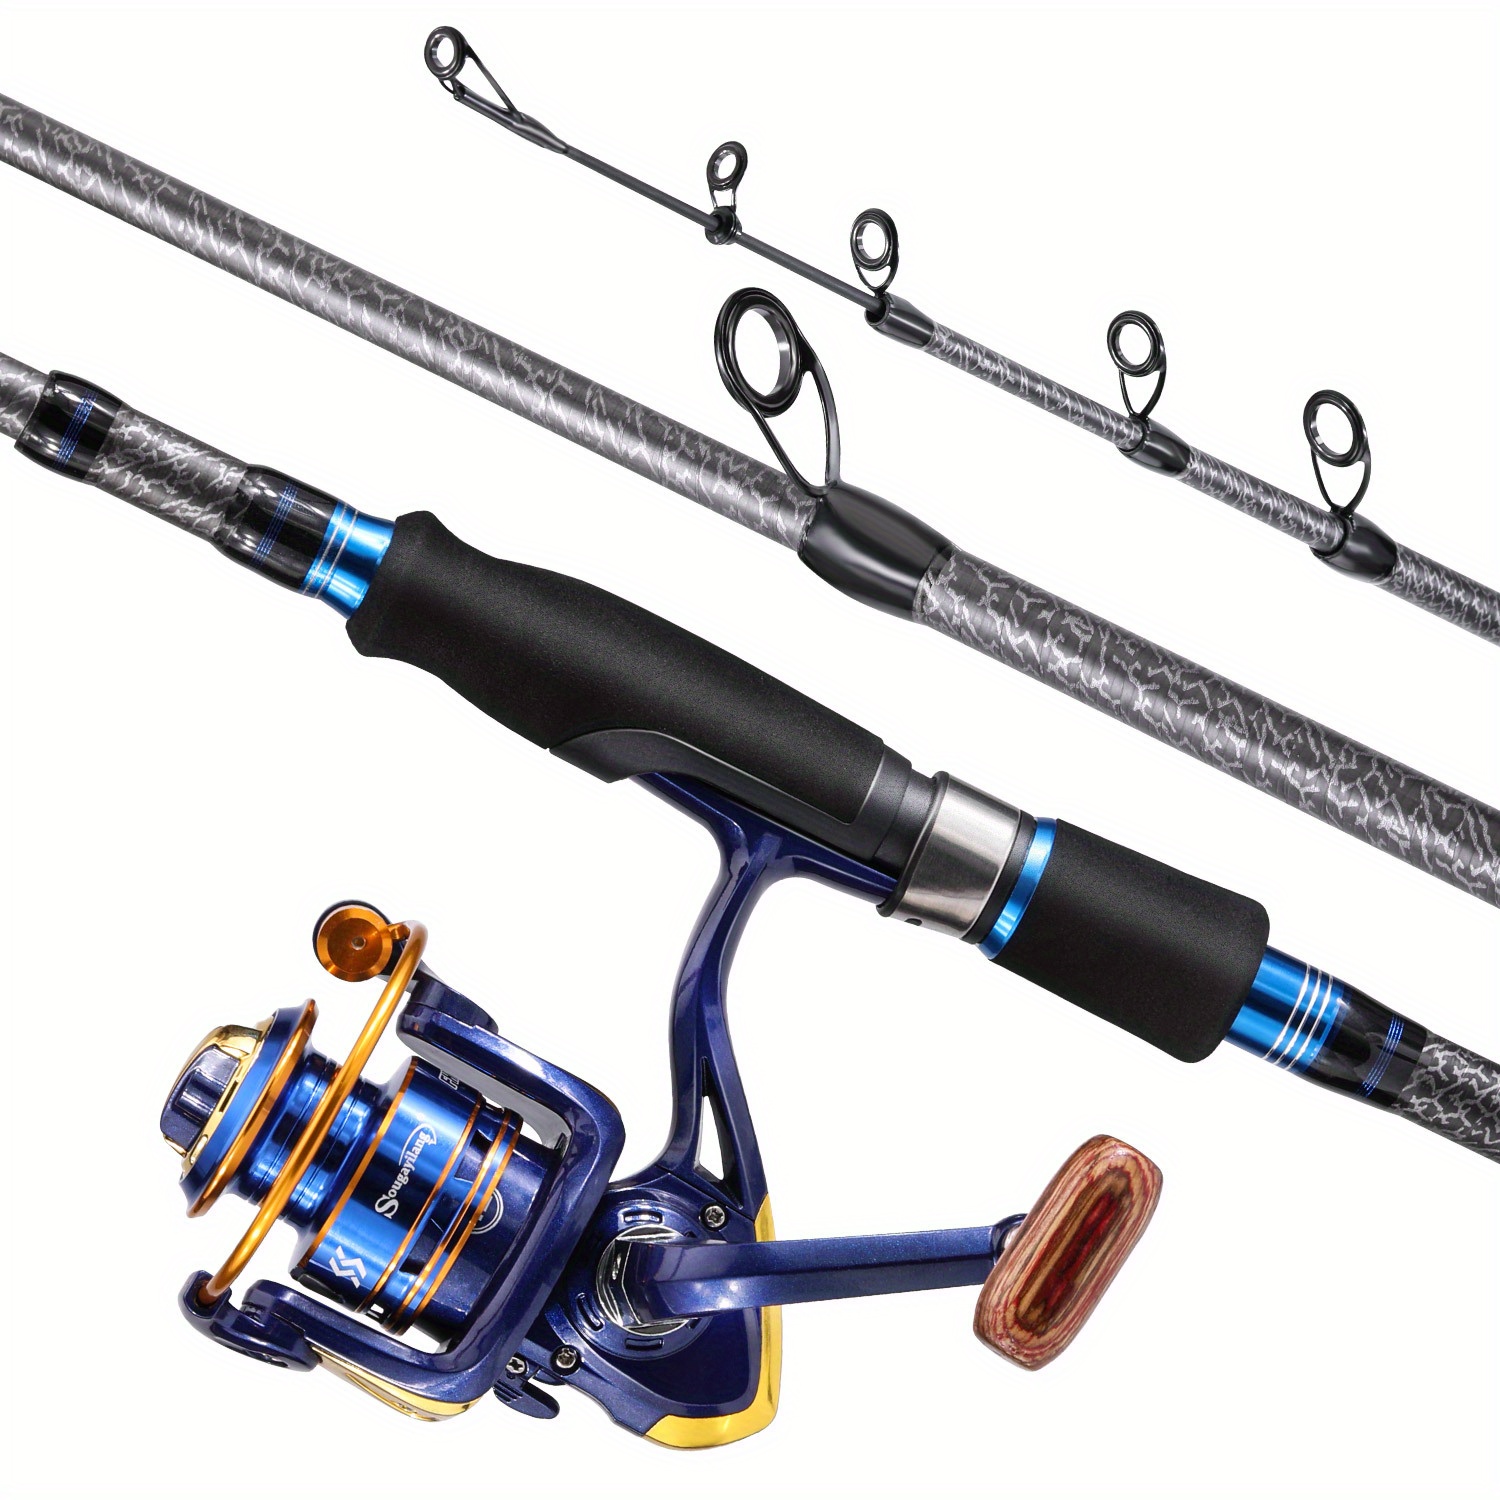  Sougayilang Fishing Pole Kit,Telescopic Fishing Rod Reel Combo  with Spinning Reel,Line,Fishing Accessories and Carrier Bag, Fishing Gear  Set for Beginner Adults-1.8M Rod 2000 Reel with Bag : Sports & Outdoors